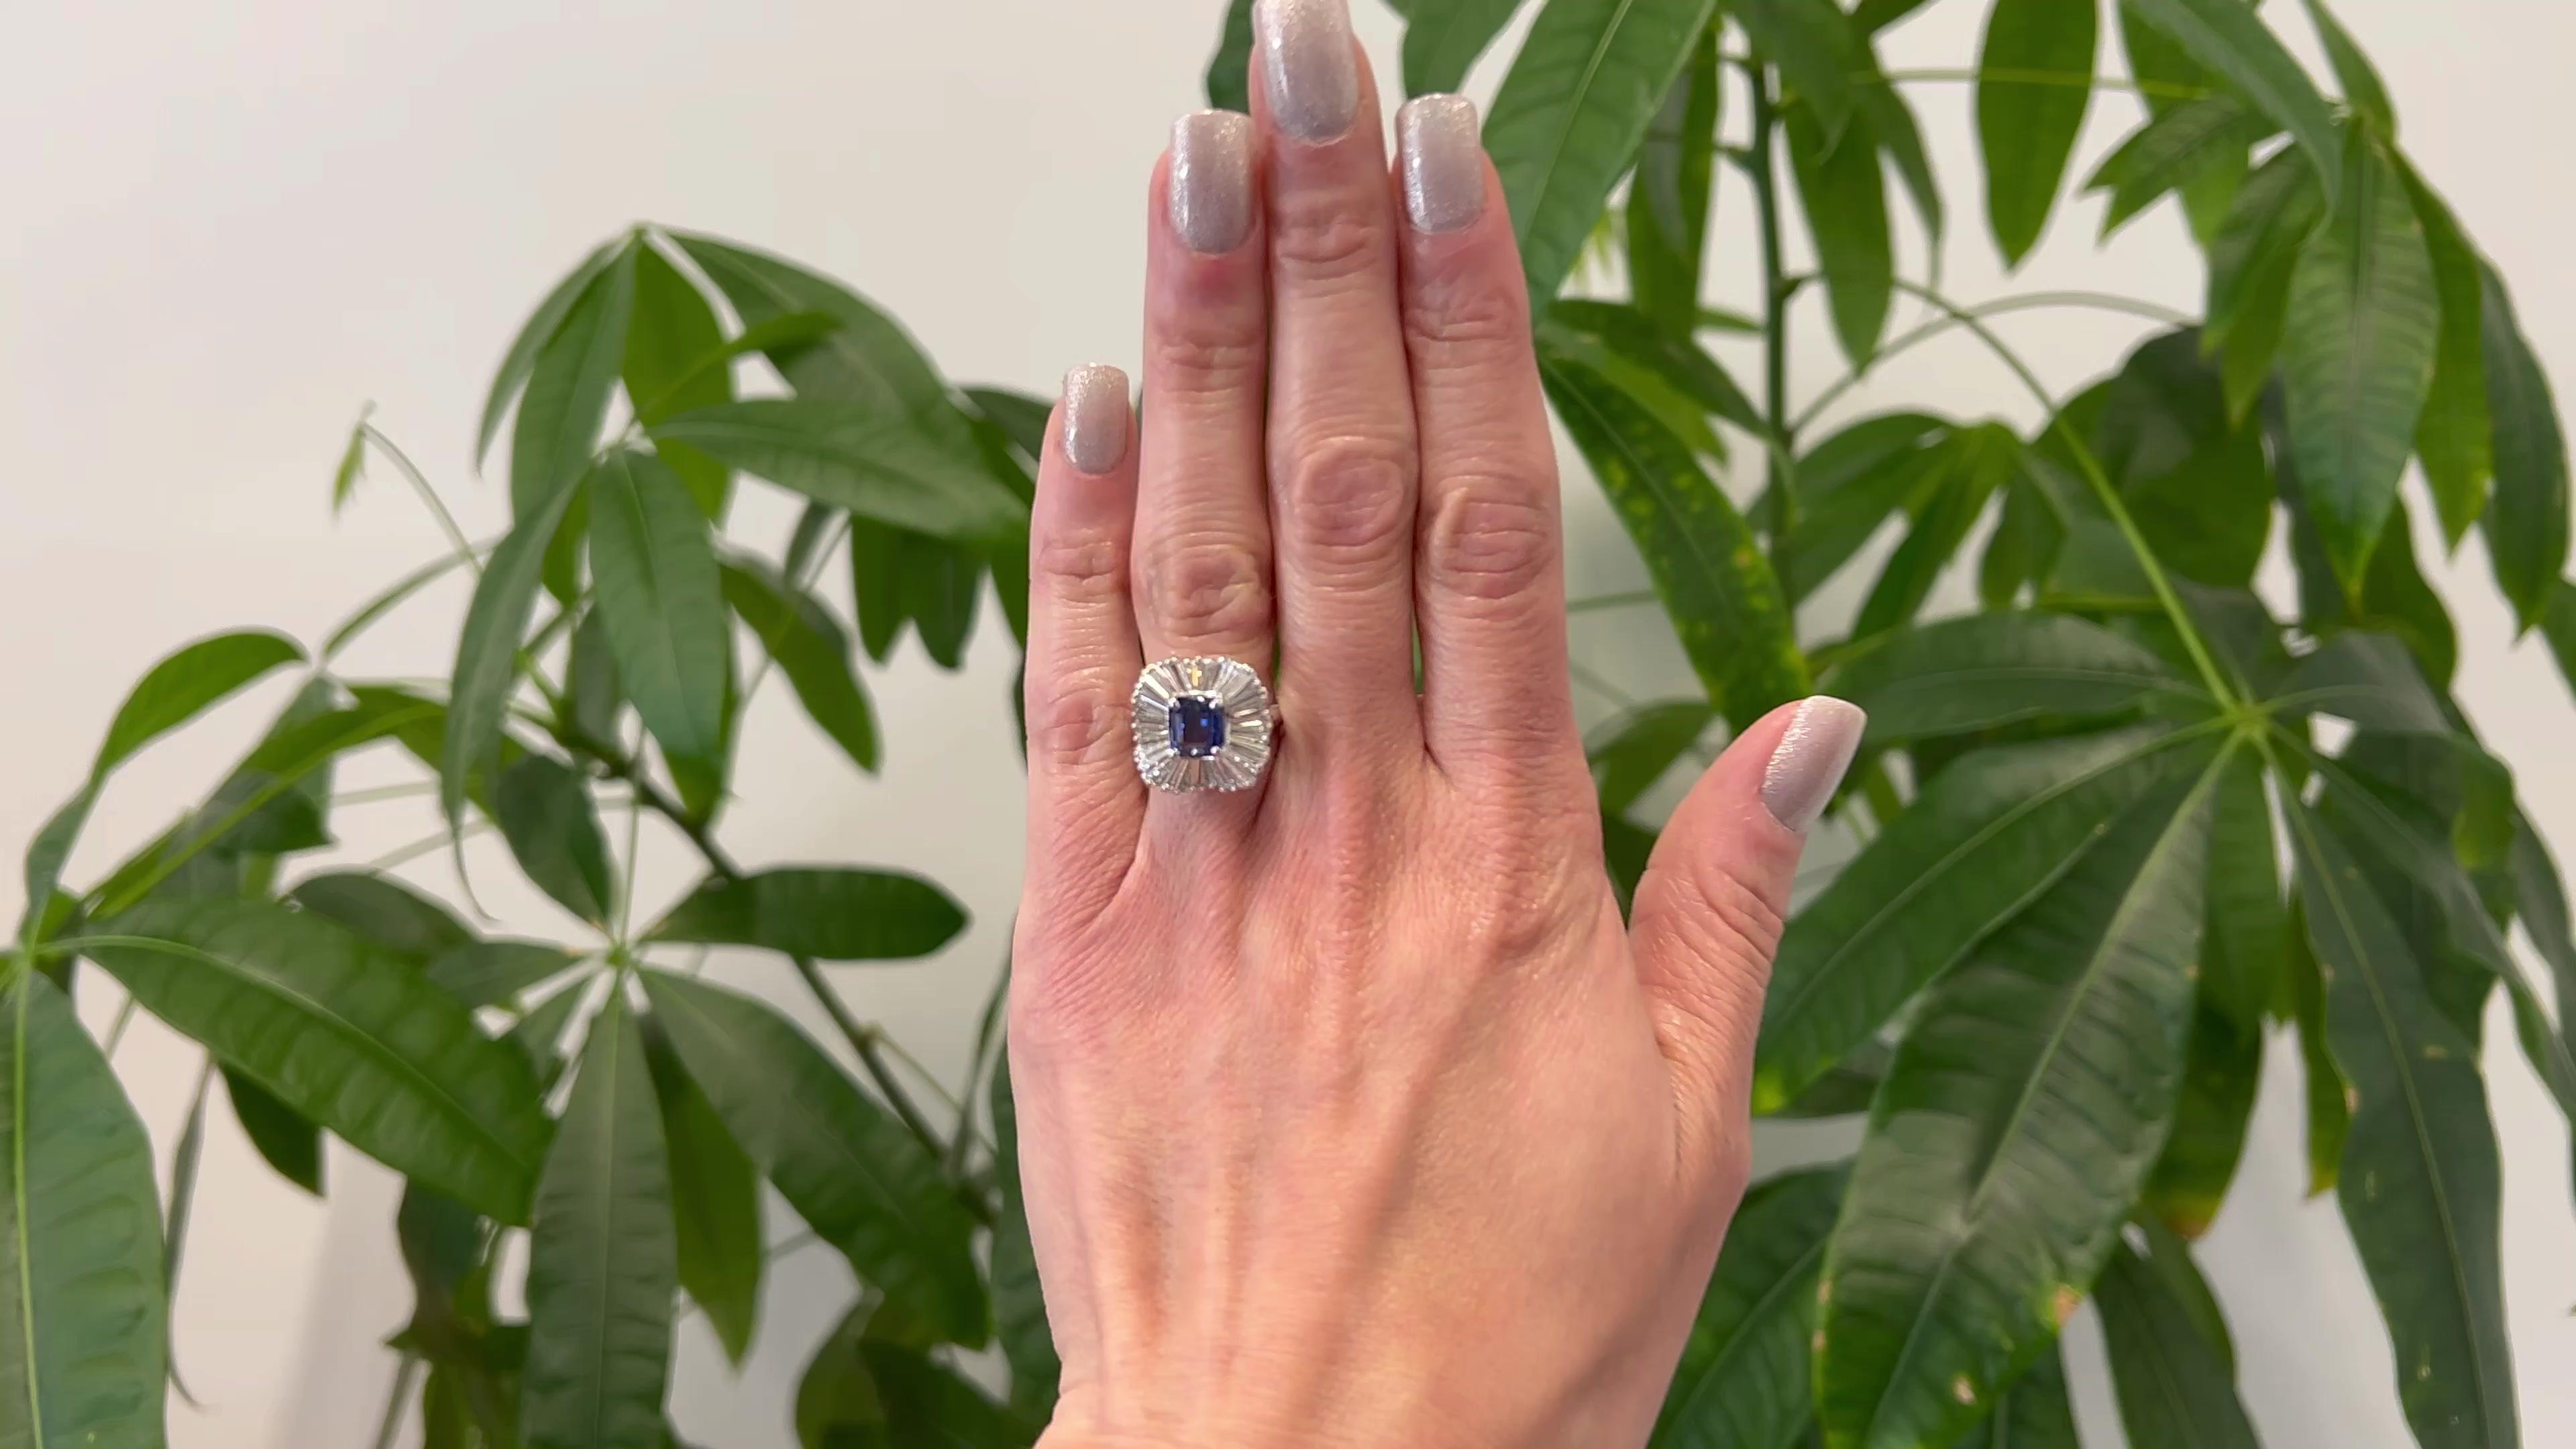 One Vintage GIA 1.87 Carat Burma No Heat Sapphire and Diamond 14k White Gold Ballerina Ring. Featuring one GIA cushion mixed cut sapphire of 1.87 carats, accompanied with GIA #6224772366 stating the sapphire is of Burma (Myanmar) origin and has no